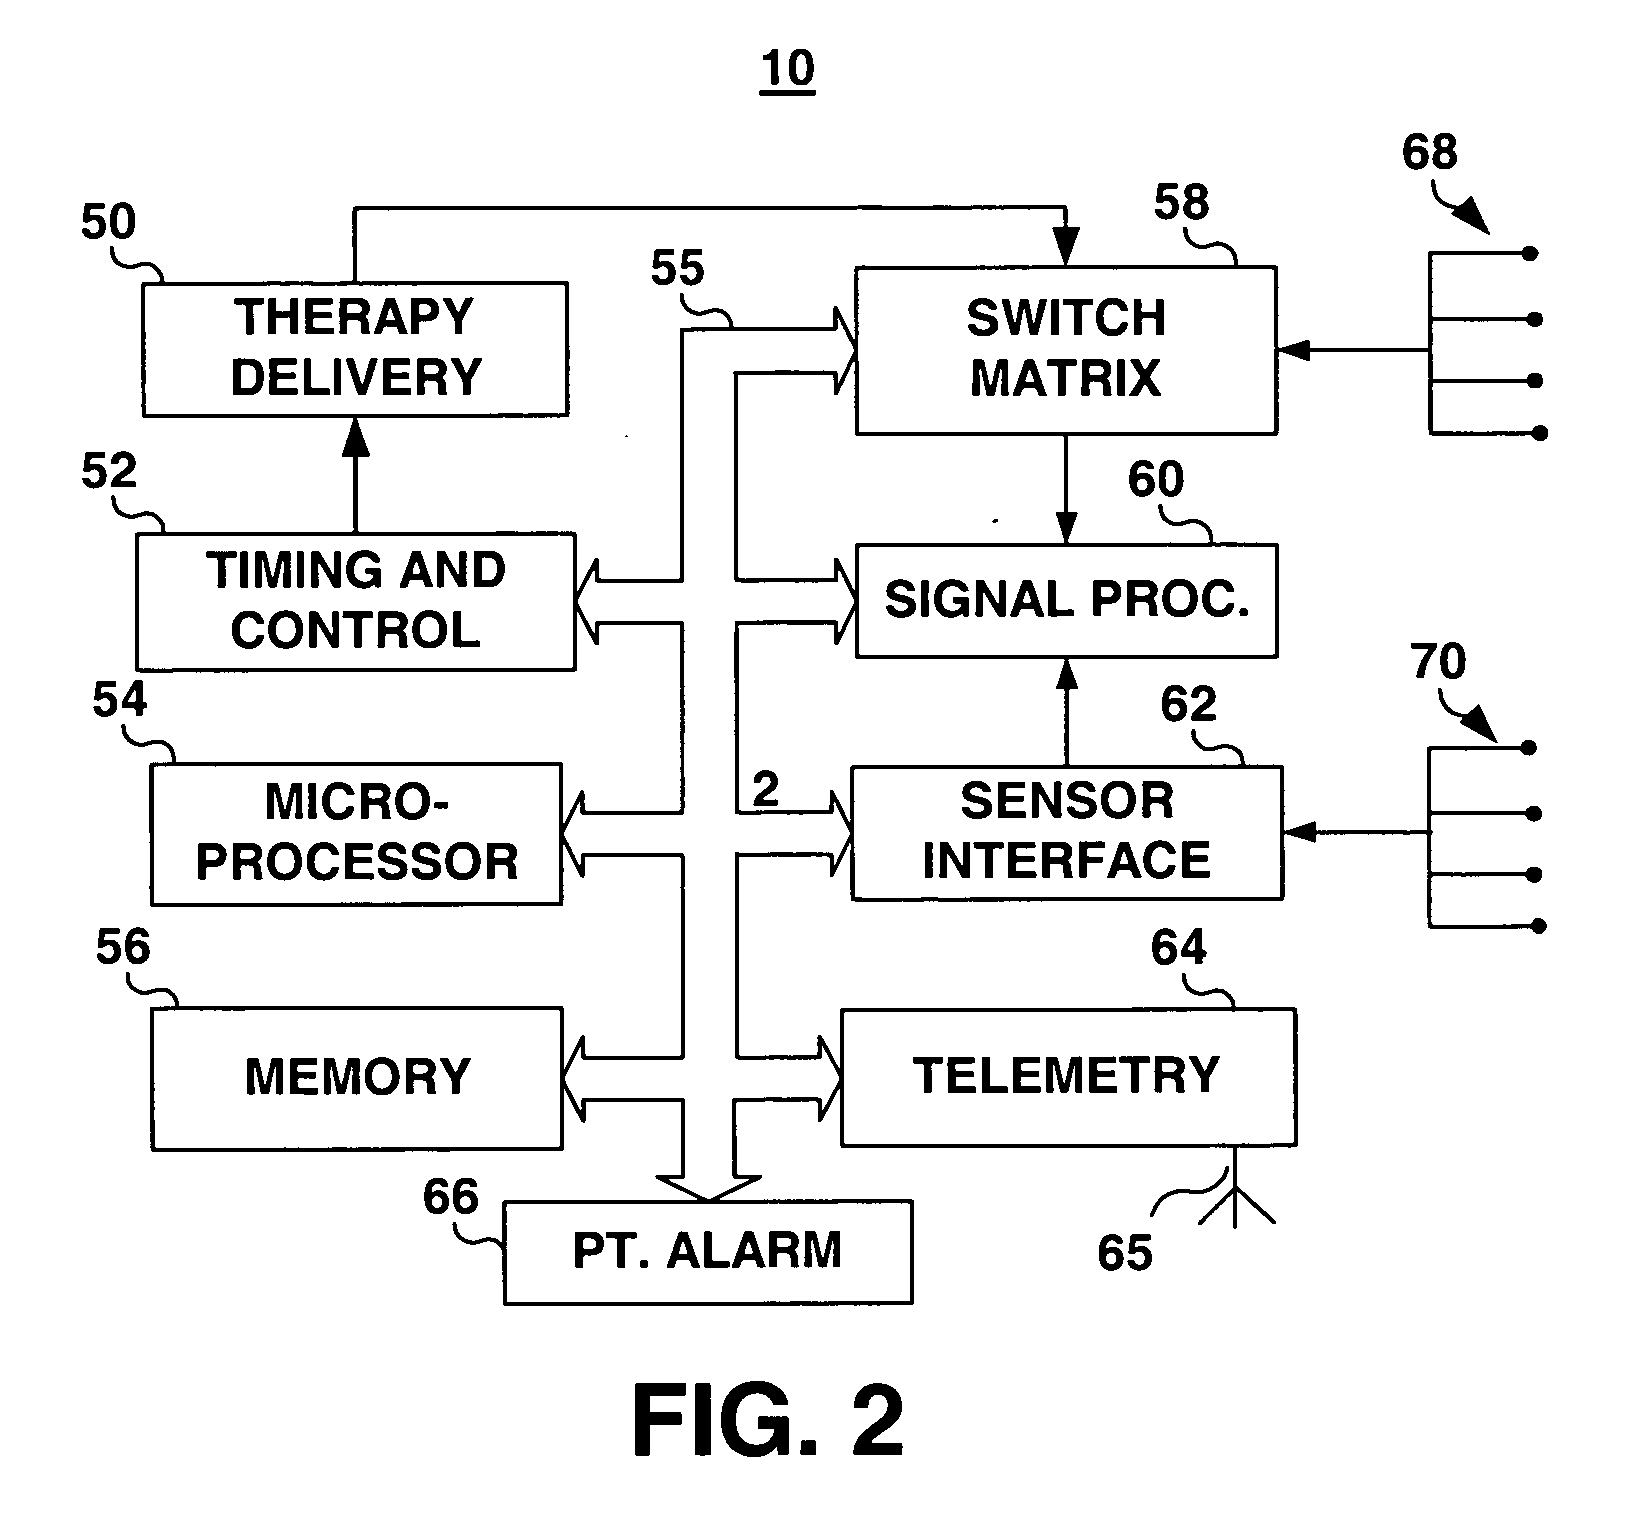 Method of graphical display of link status and fail-safe mechanism for safety during real-time medical device therapy